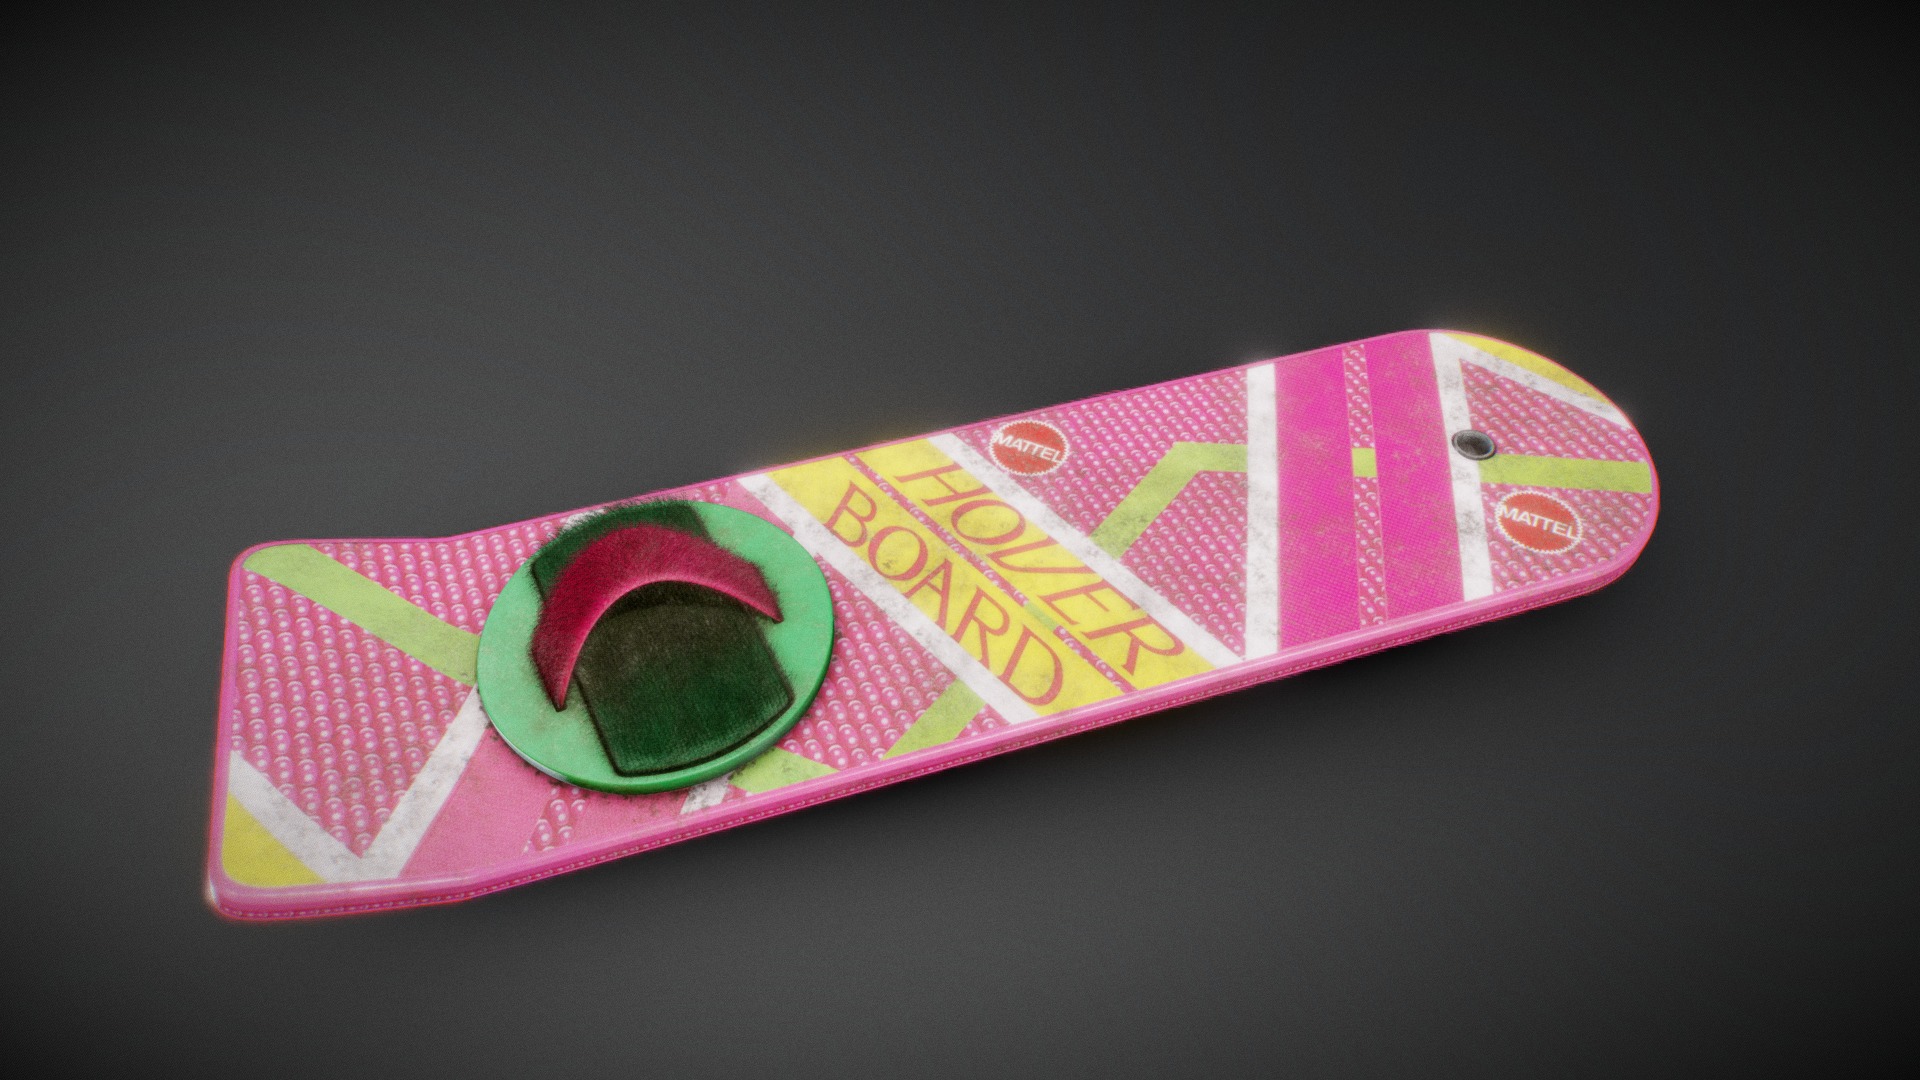 3D model Hoverboard – Back to the future - This is a 3D model of the Hoverboard - Back to the future. The 3D model is about a colorful box with a hole in it.